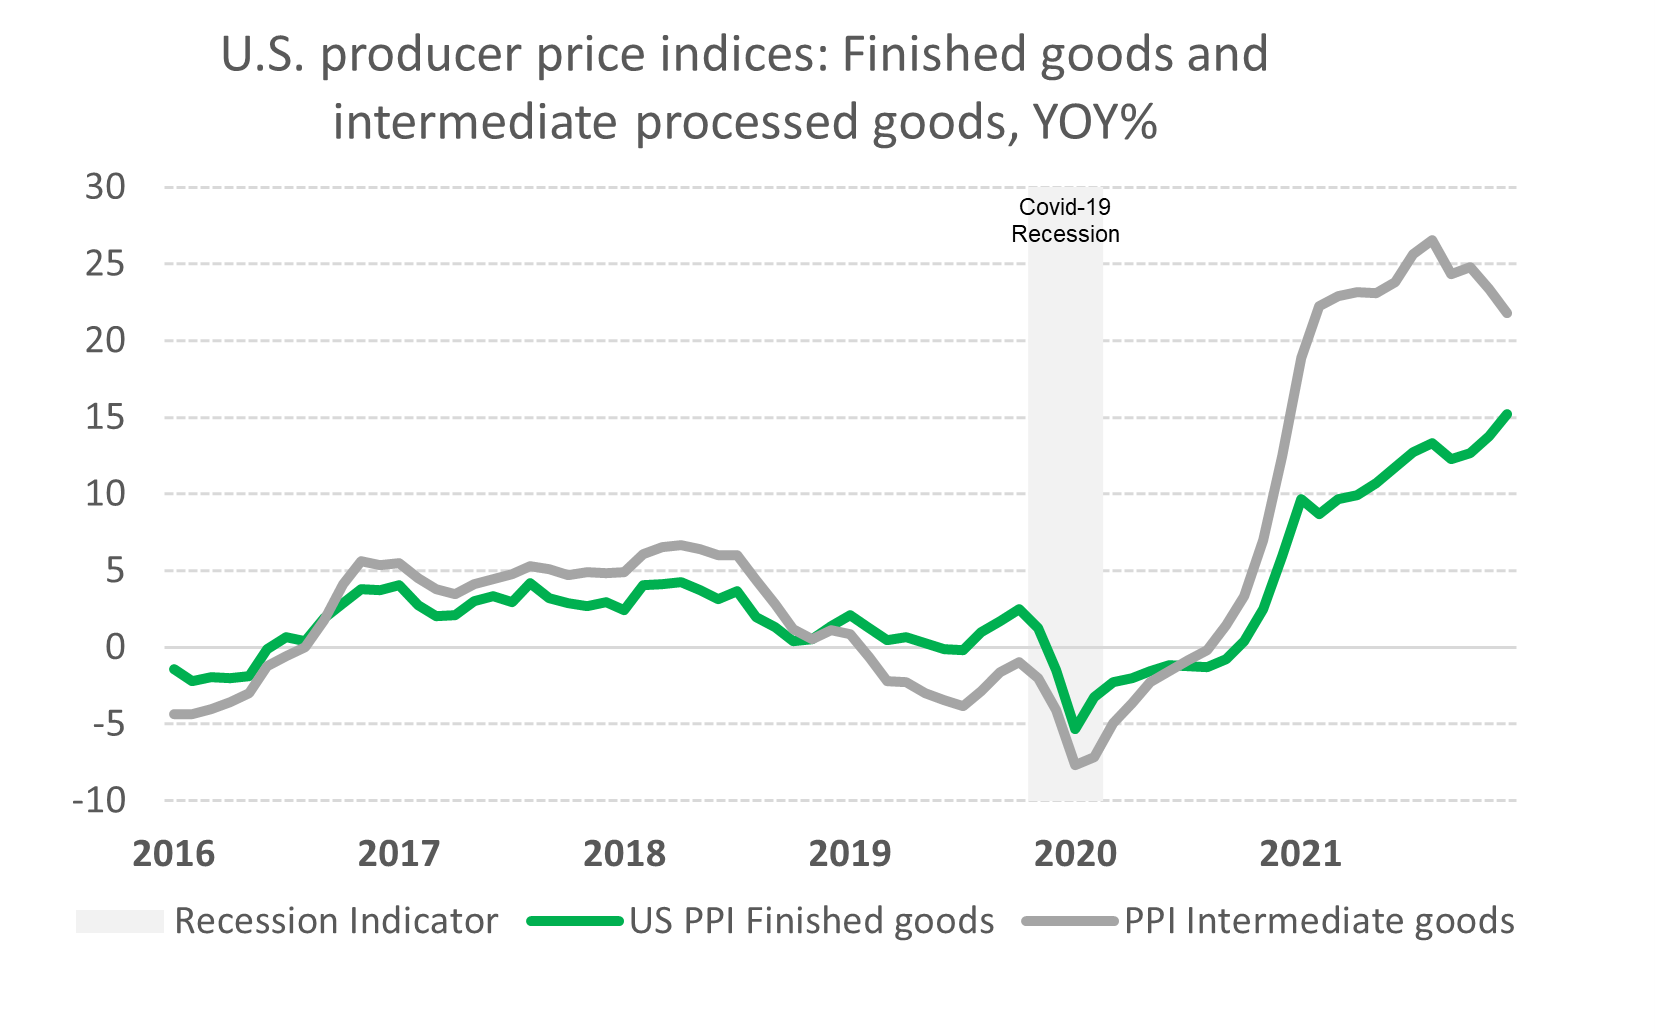 A chart shows U.S. producer price indices for finished goods and intermediate processed goods from 2016 through early 2022